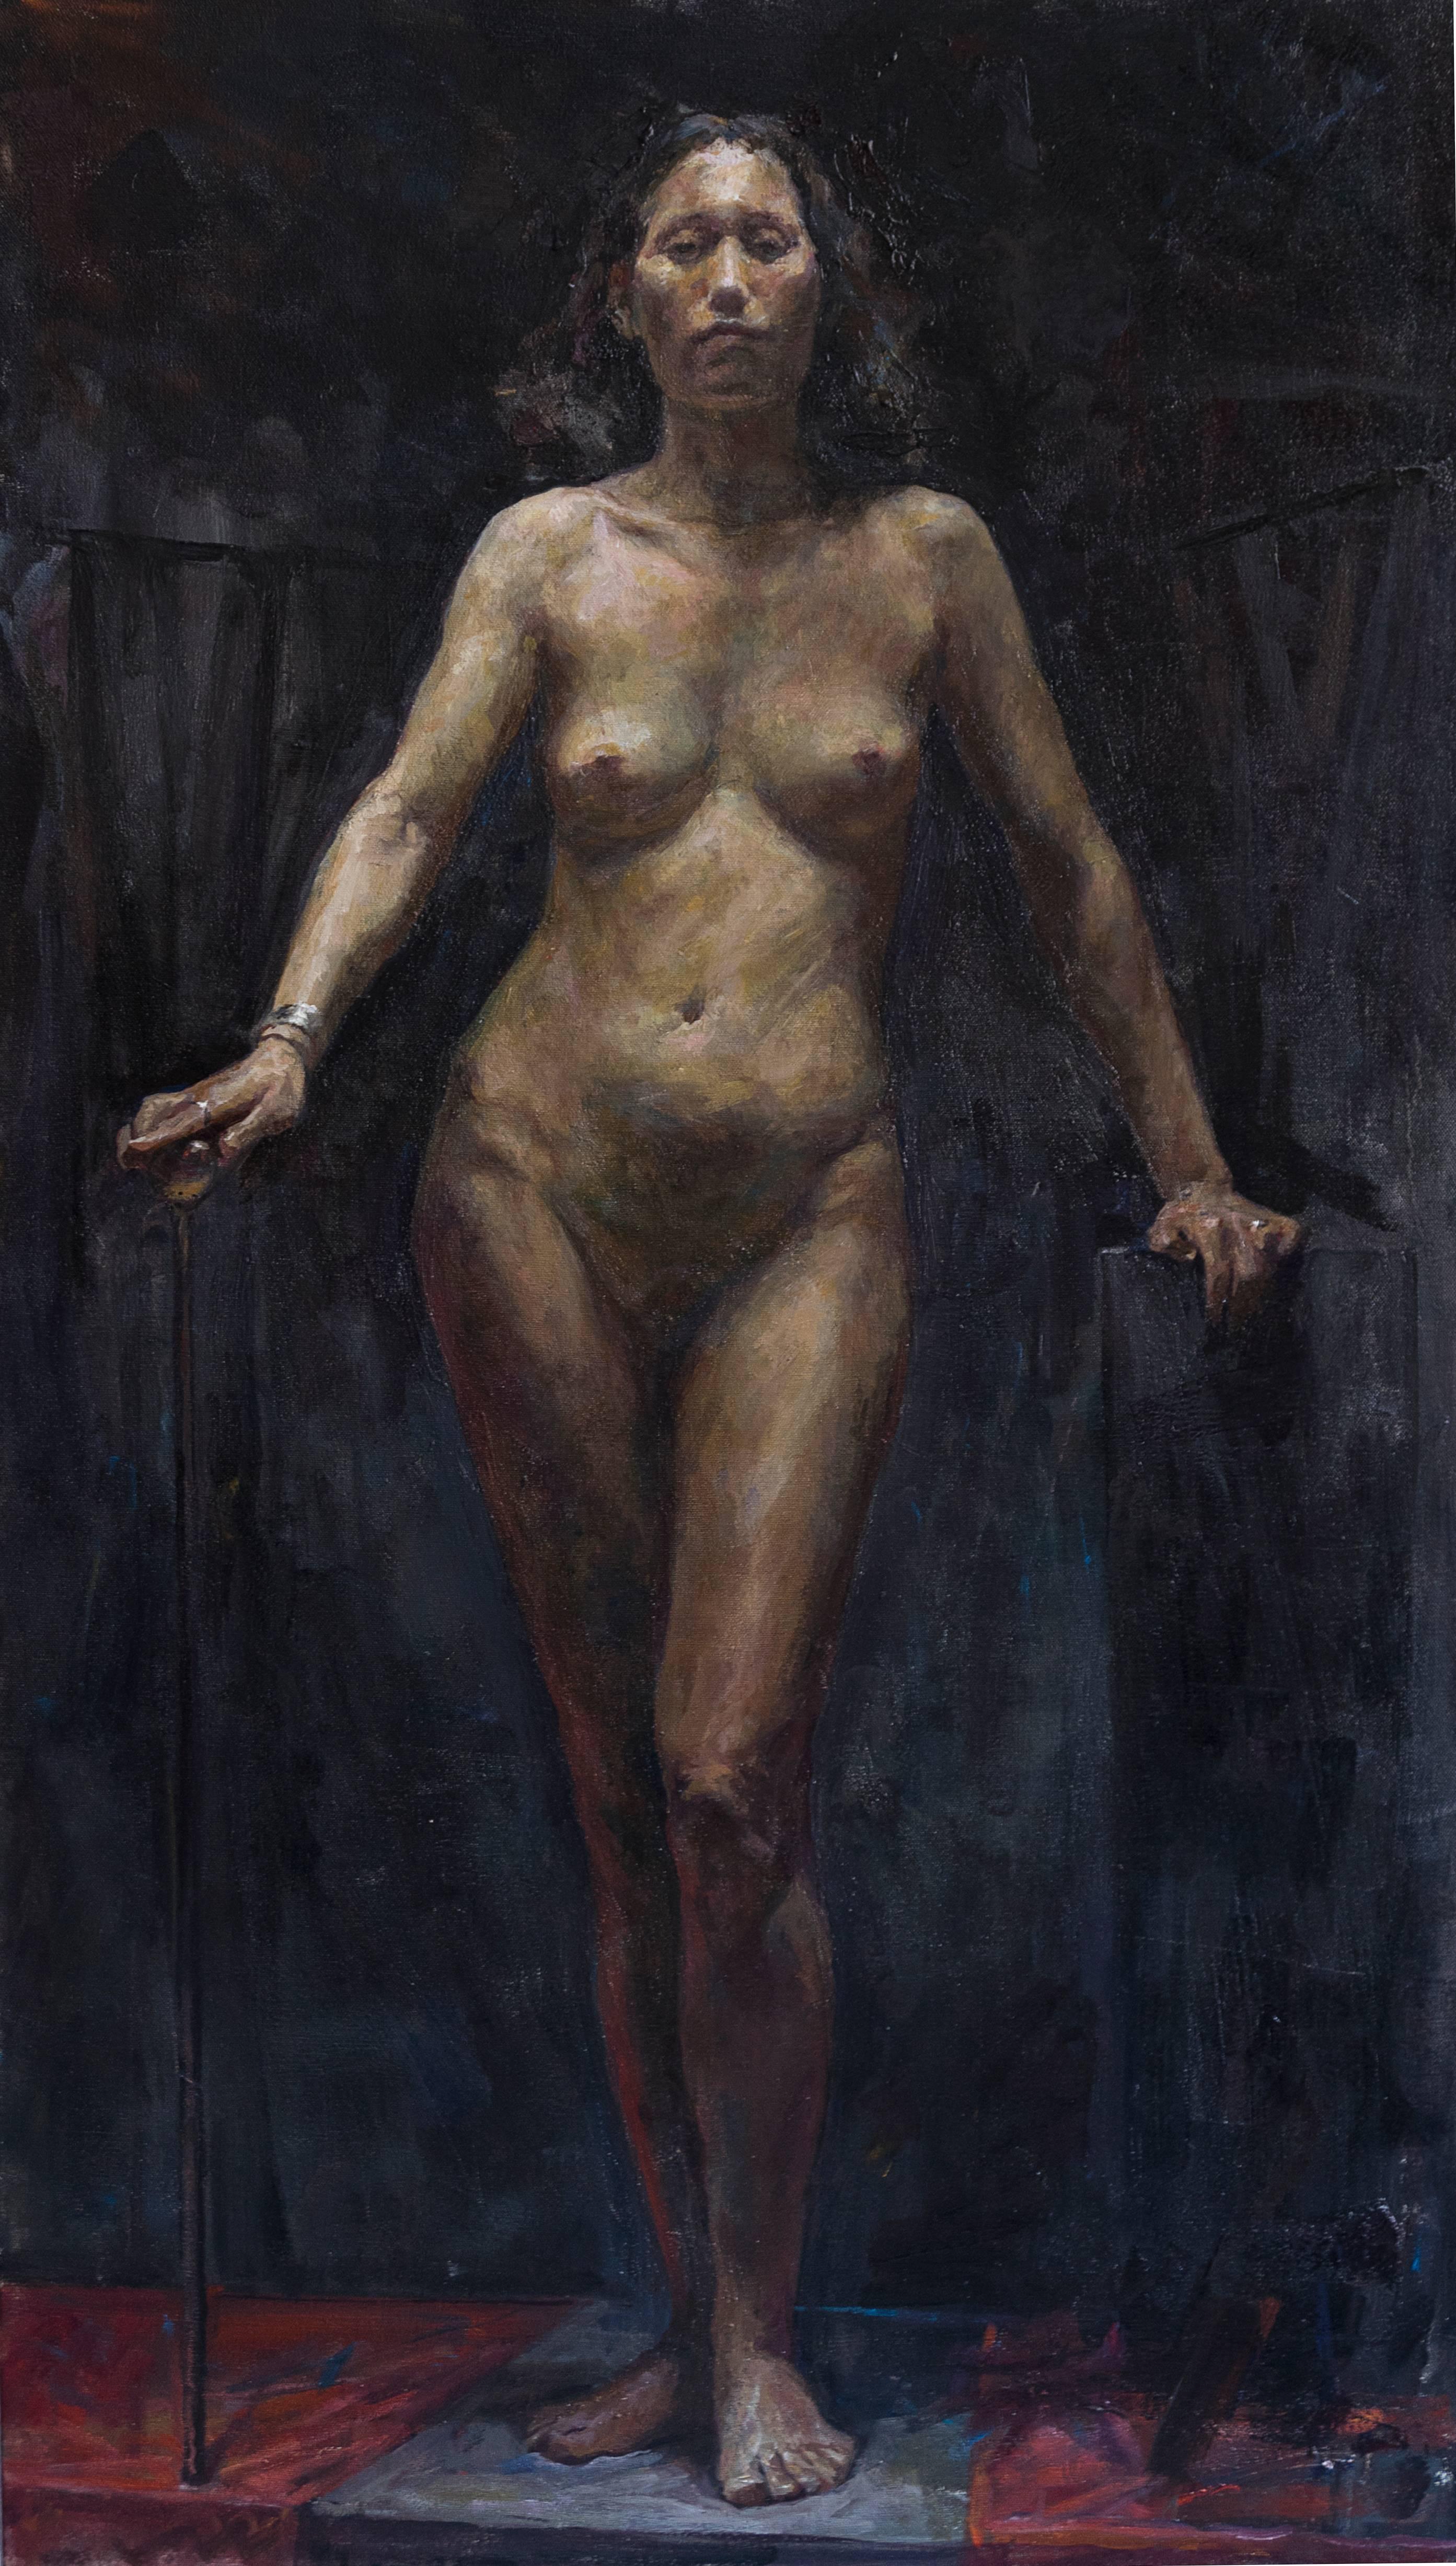 Iliya Morchnik, Competition Nude, 2nd Place Winner - Boston Academy of Realist Art, 2016, 42in X 24in, oil of canvas.   ILIYA MIROCHNIK- ARTIST BIO:
Originally from Odessa, Ukraine, Iliya immigrated to the United States in the early 1990's with his